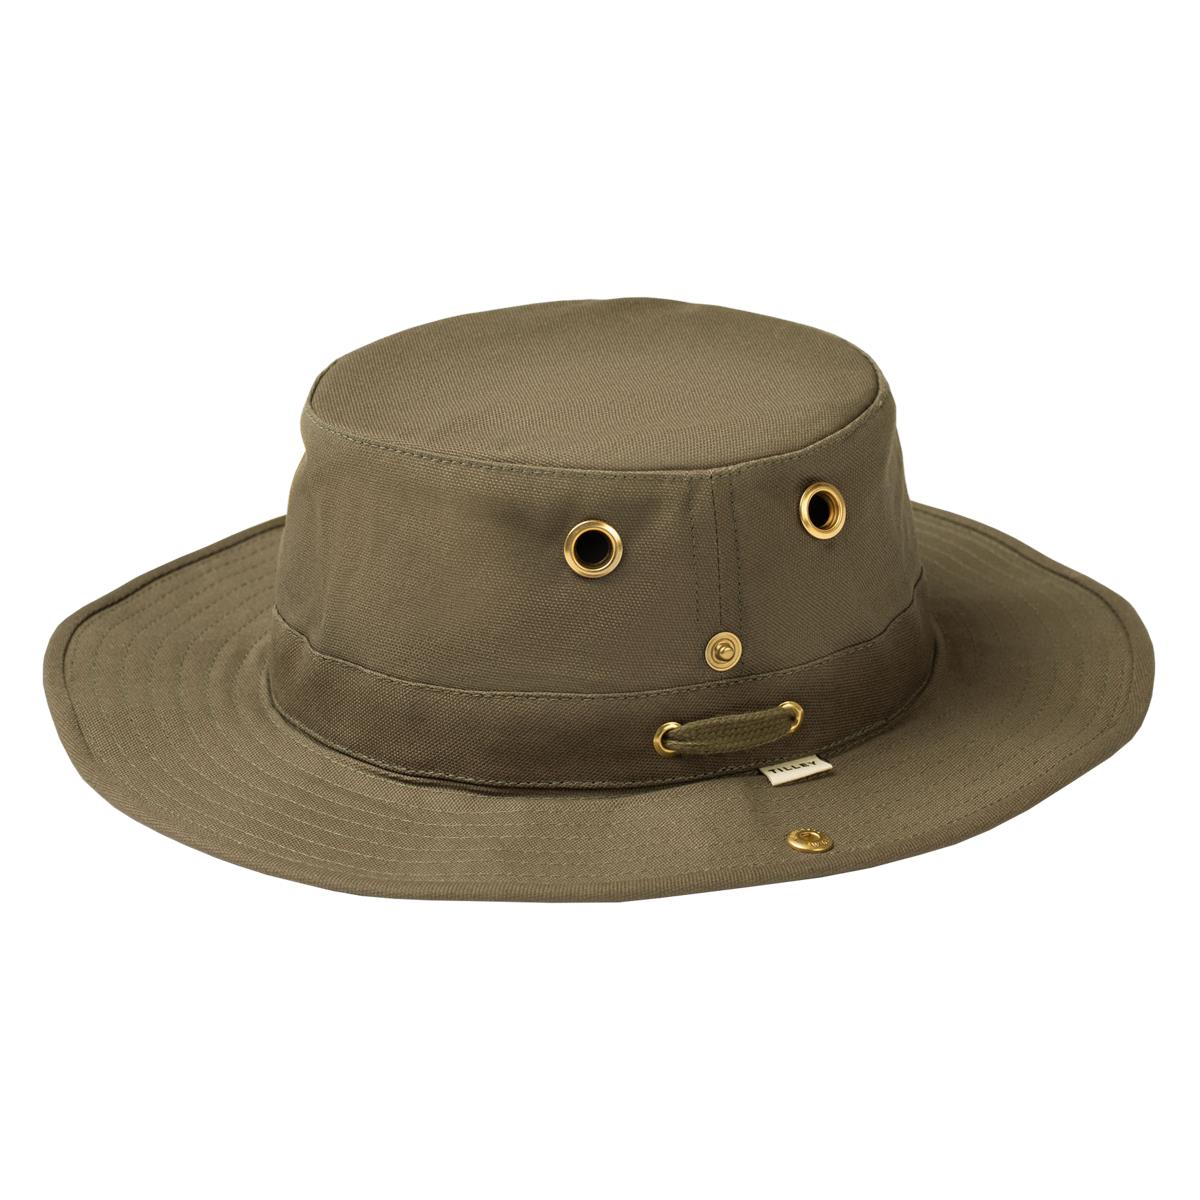 What are the specifics of the Tilley Hemp Hat TH5?